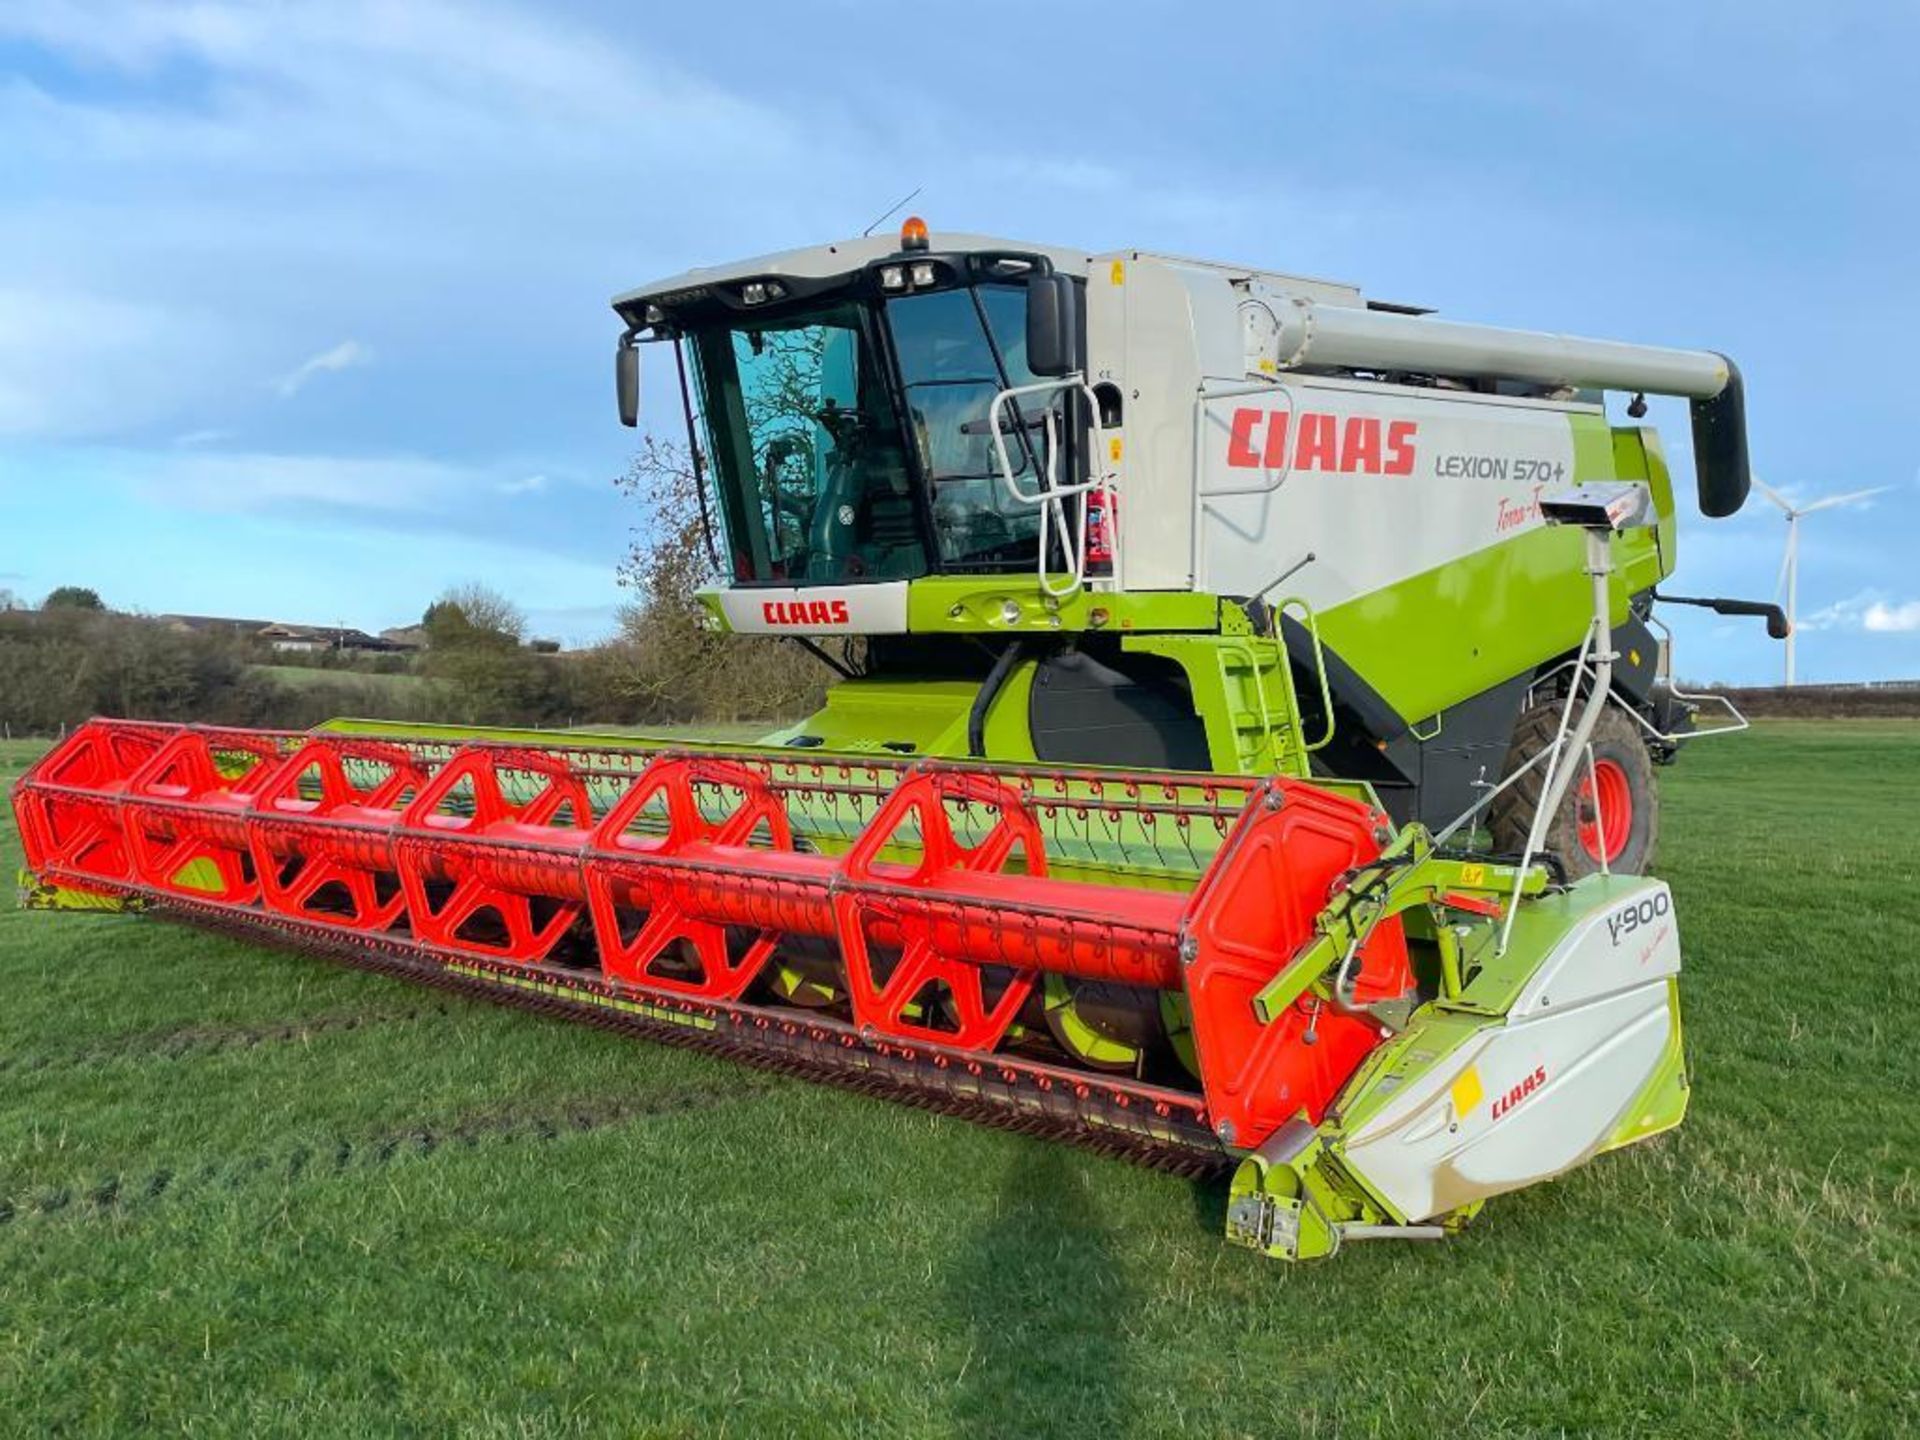 2007 Claas Lexion 570+TT Terra Trac combine harvester with straw chopper and Claas V900 header with - Image 10 of 31